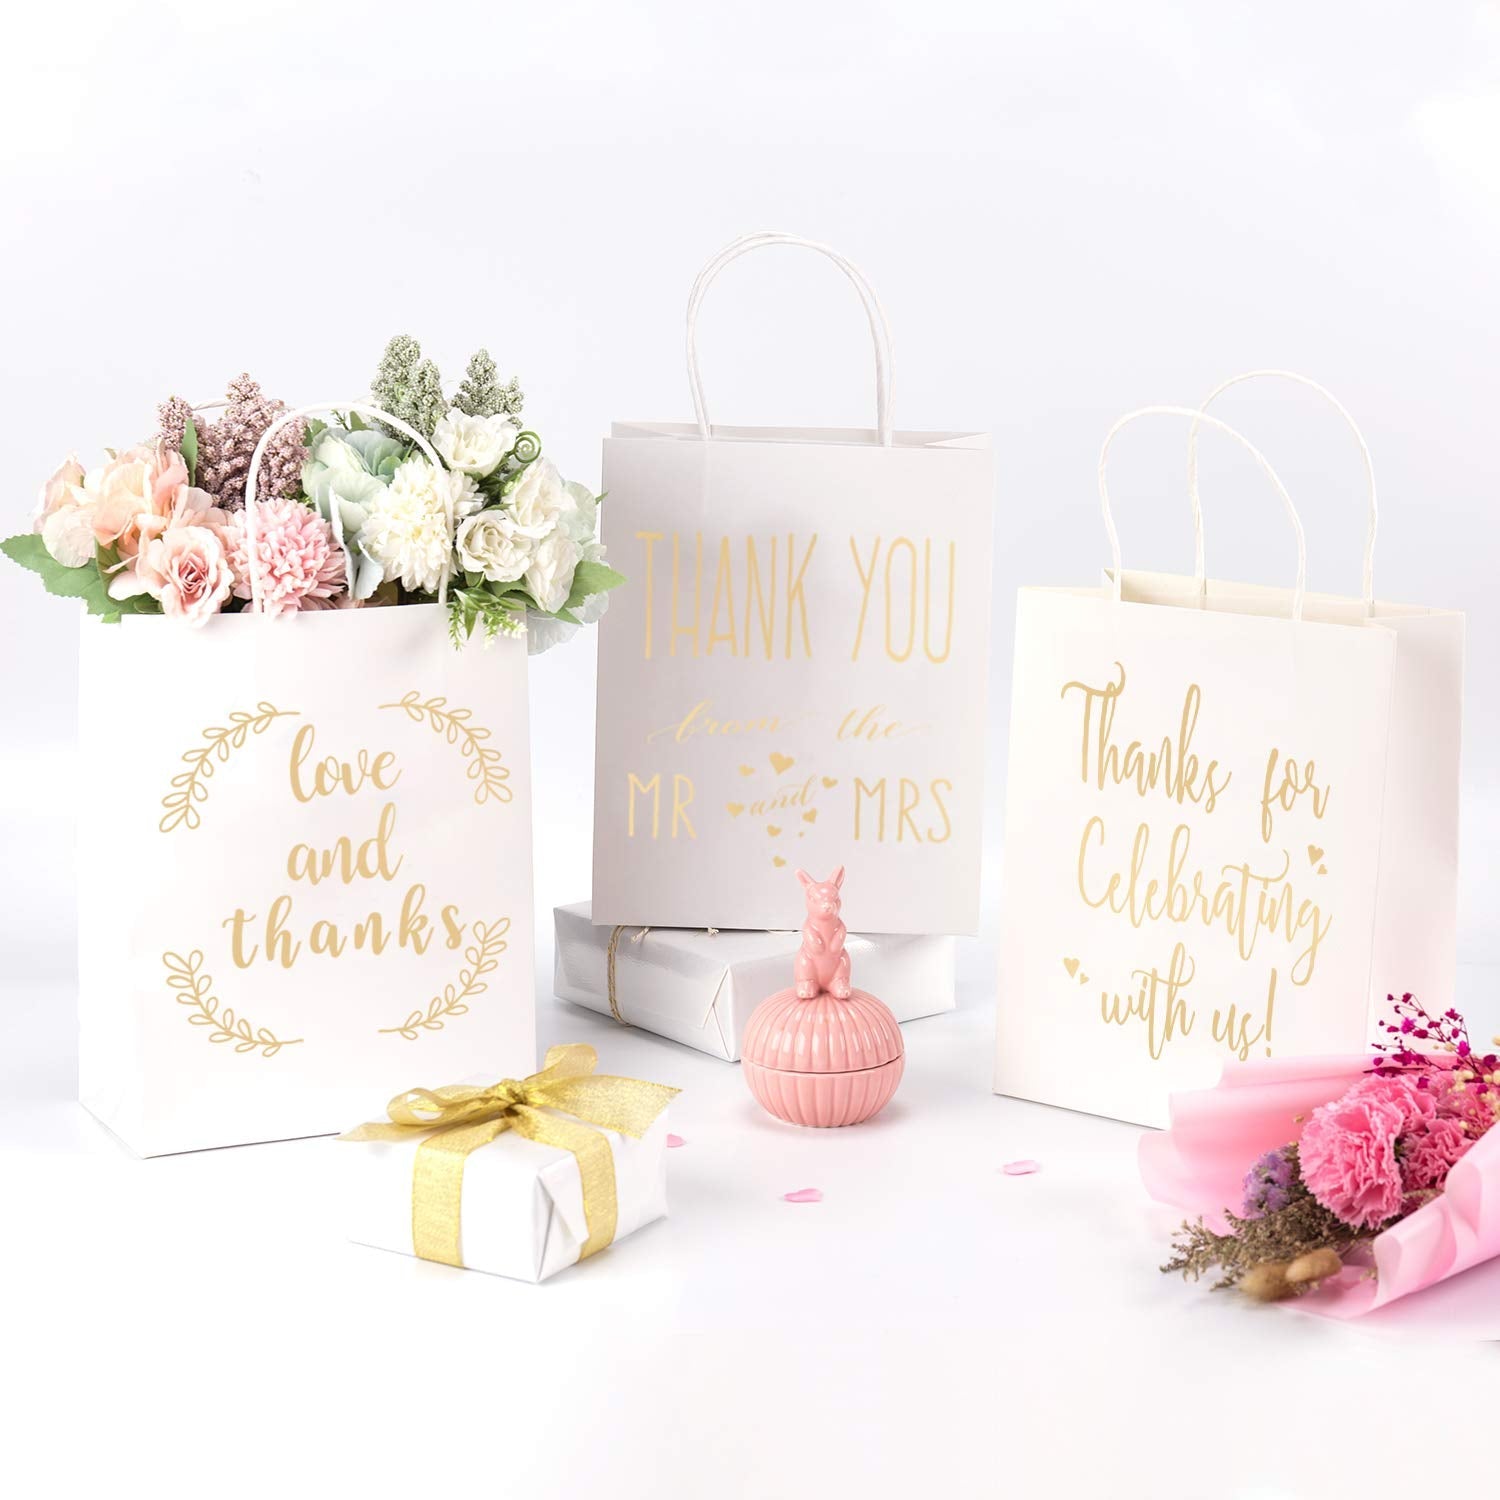 Medium Size Wedding Party Favor Gift Bags - 8"x 4" x 10"- 12 Pack